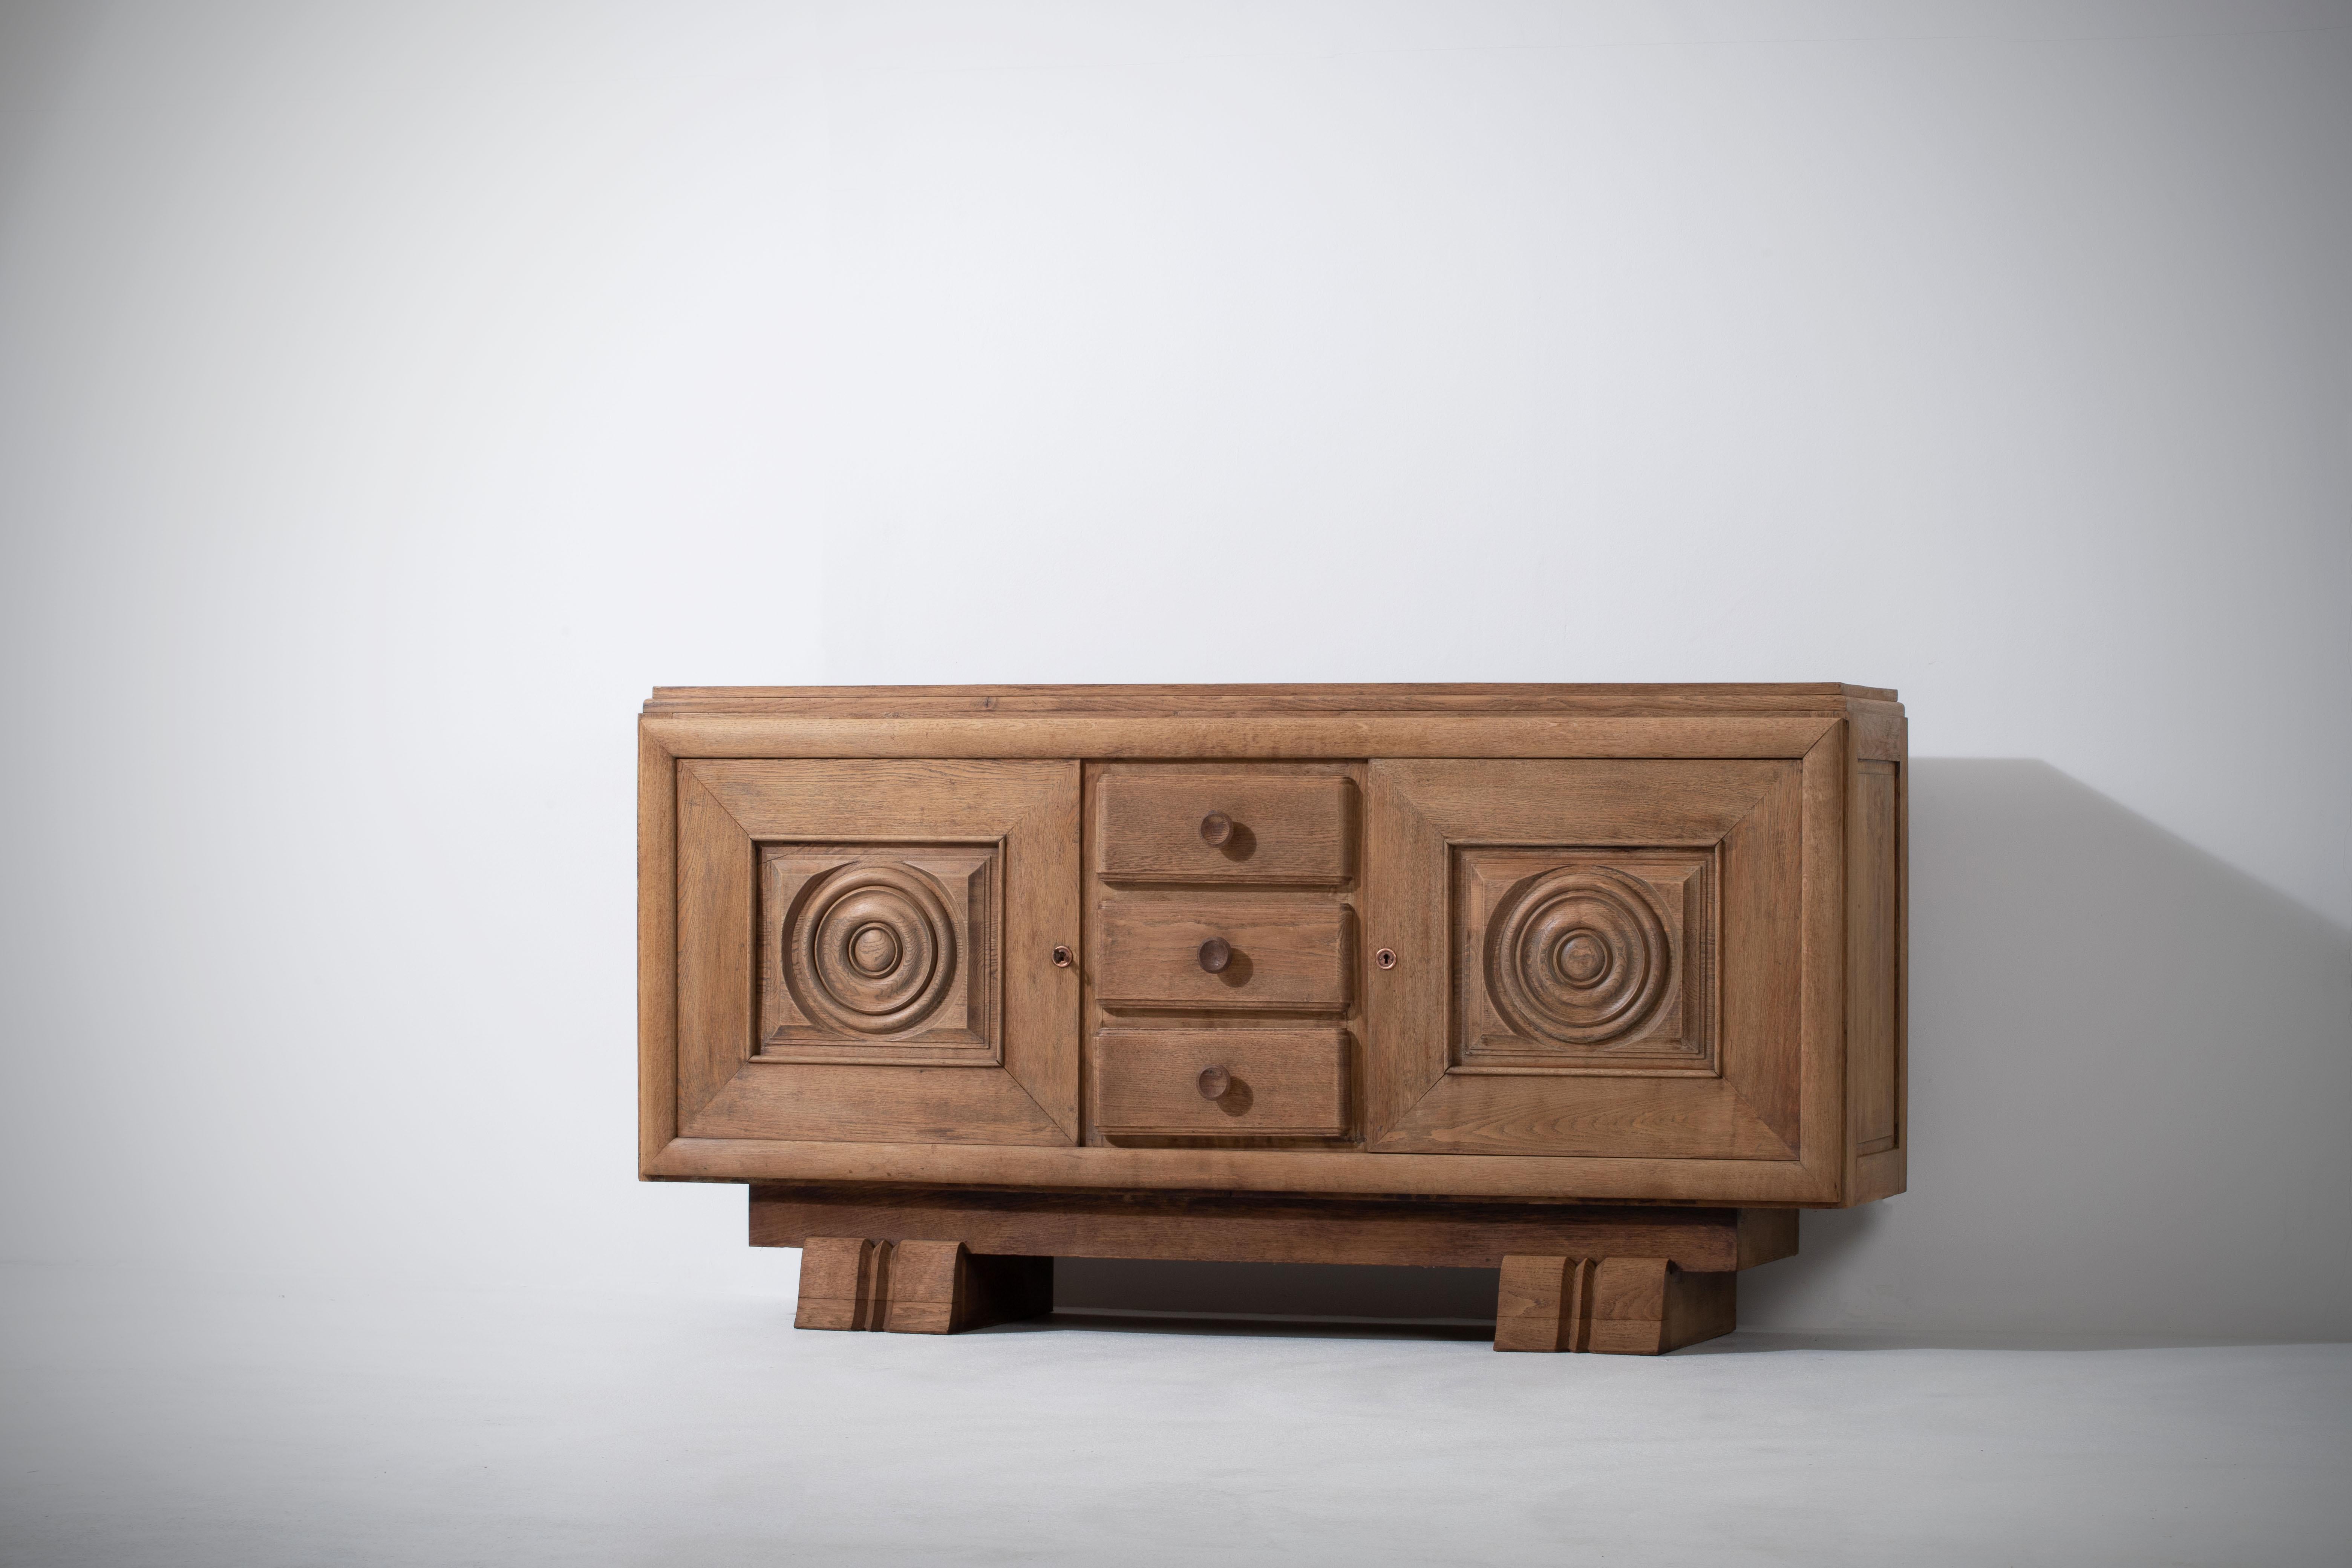 A large sideboard/credenza presumably by Charles Dudouyt. 
France, circa 1930s.
Consists of two doors providing shelves storage compartments and a column of drawers in the center.
Signature circular shaped doors and trestle legs.
The sideboard